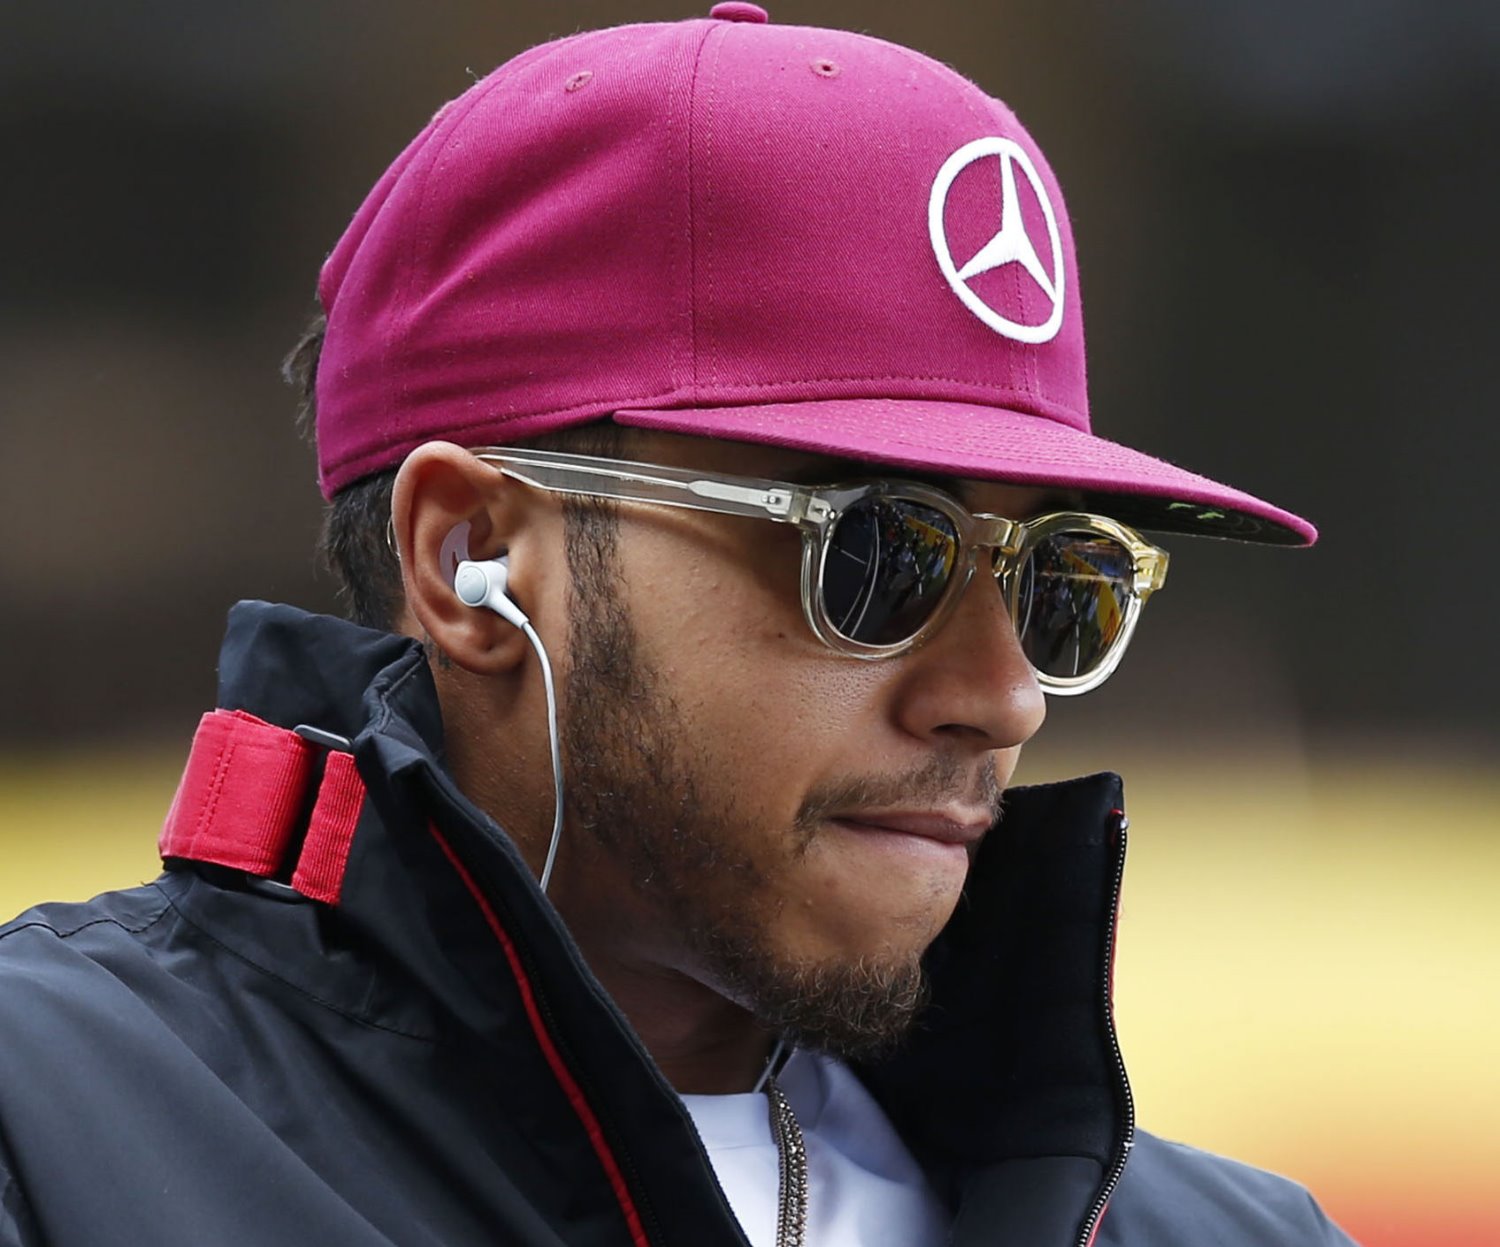 Hamilton in bad mood, can't stomach always getting beat